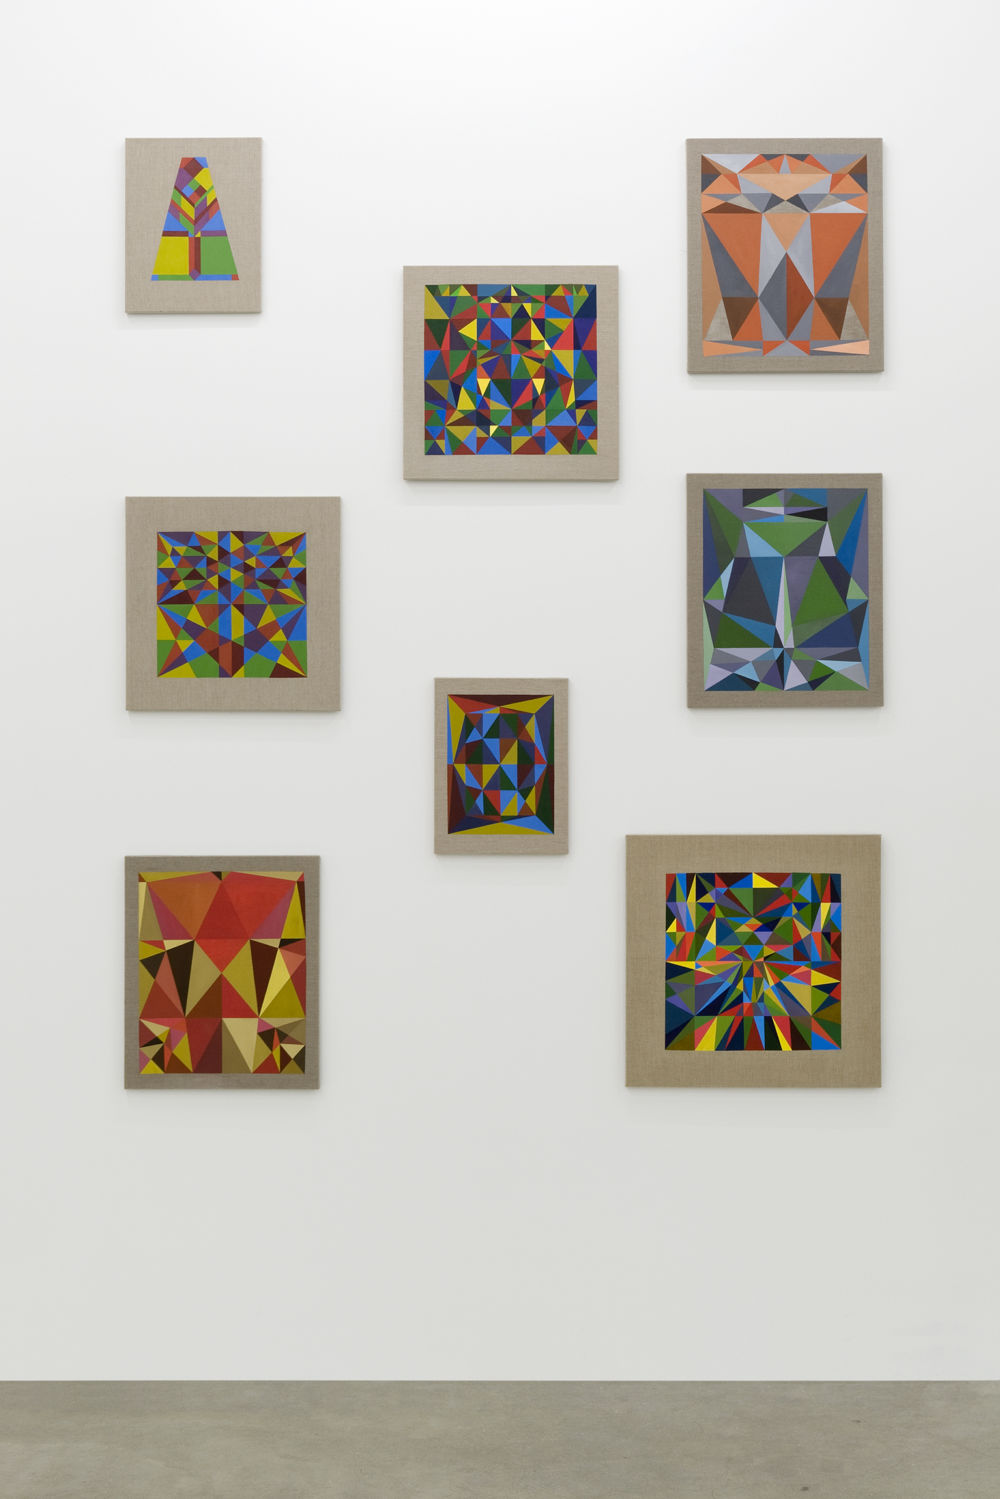 Alex Morrison, Crystalline Mock-up (I–VIII), 2010, acrylic on belgian linen, dimensions variable by 